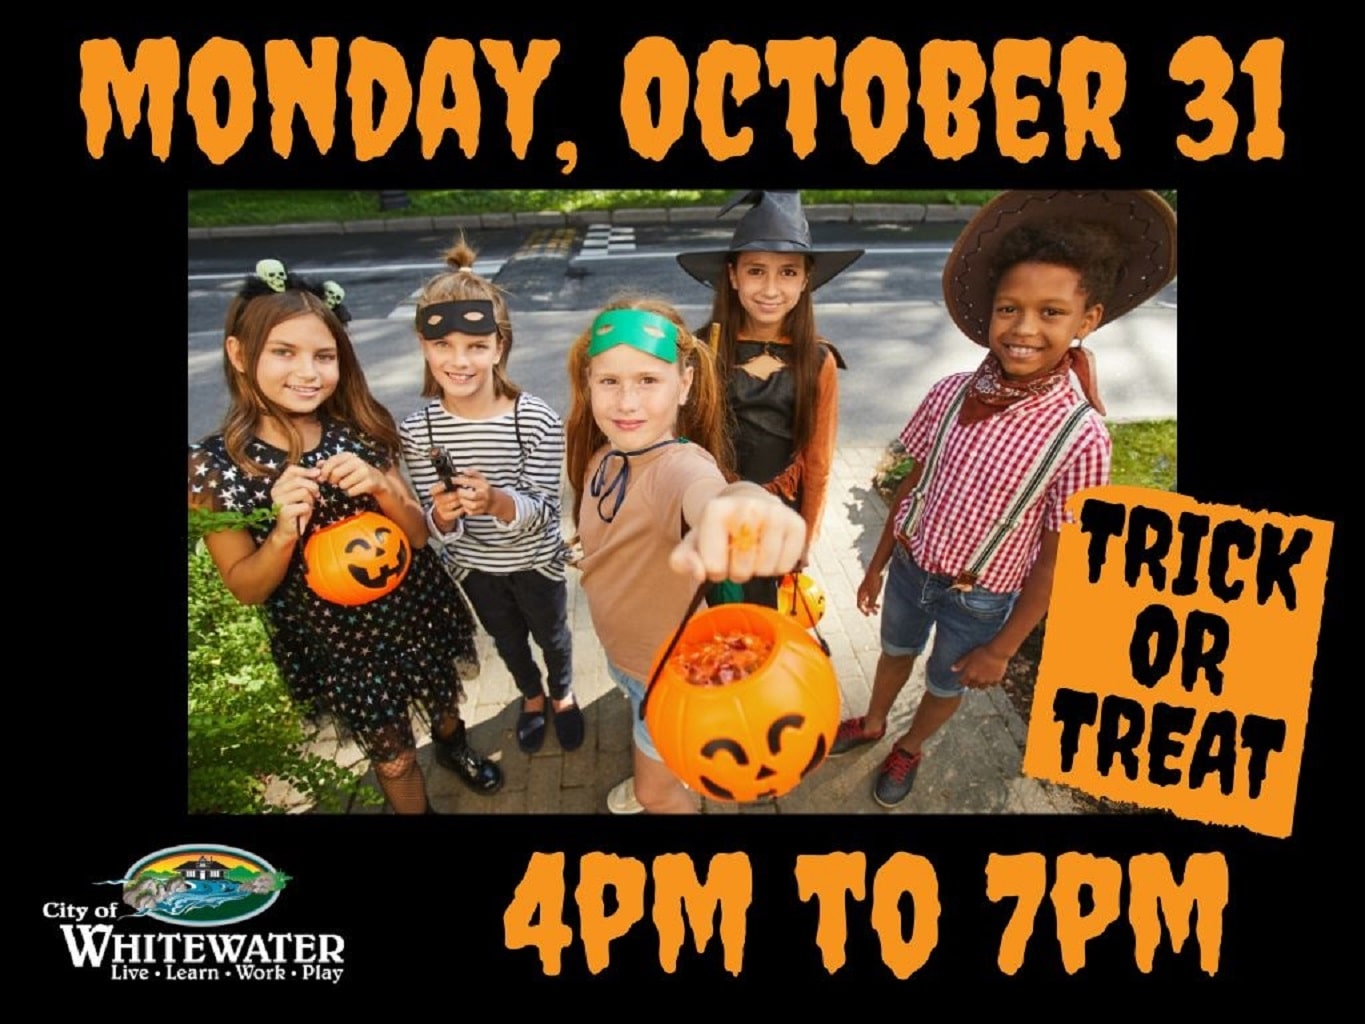 Yes, Whitewater's Trick or Treat is Always on Halloween! Whitewater